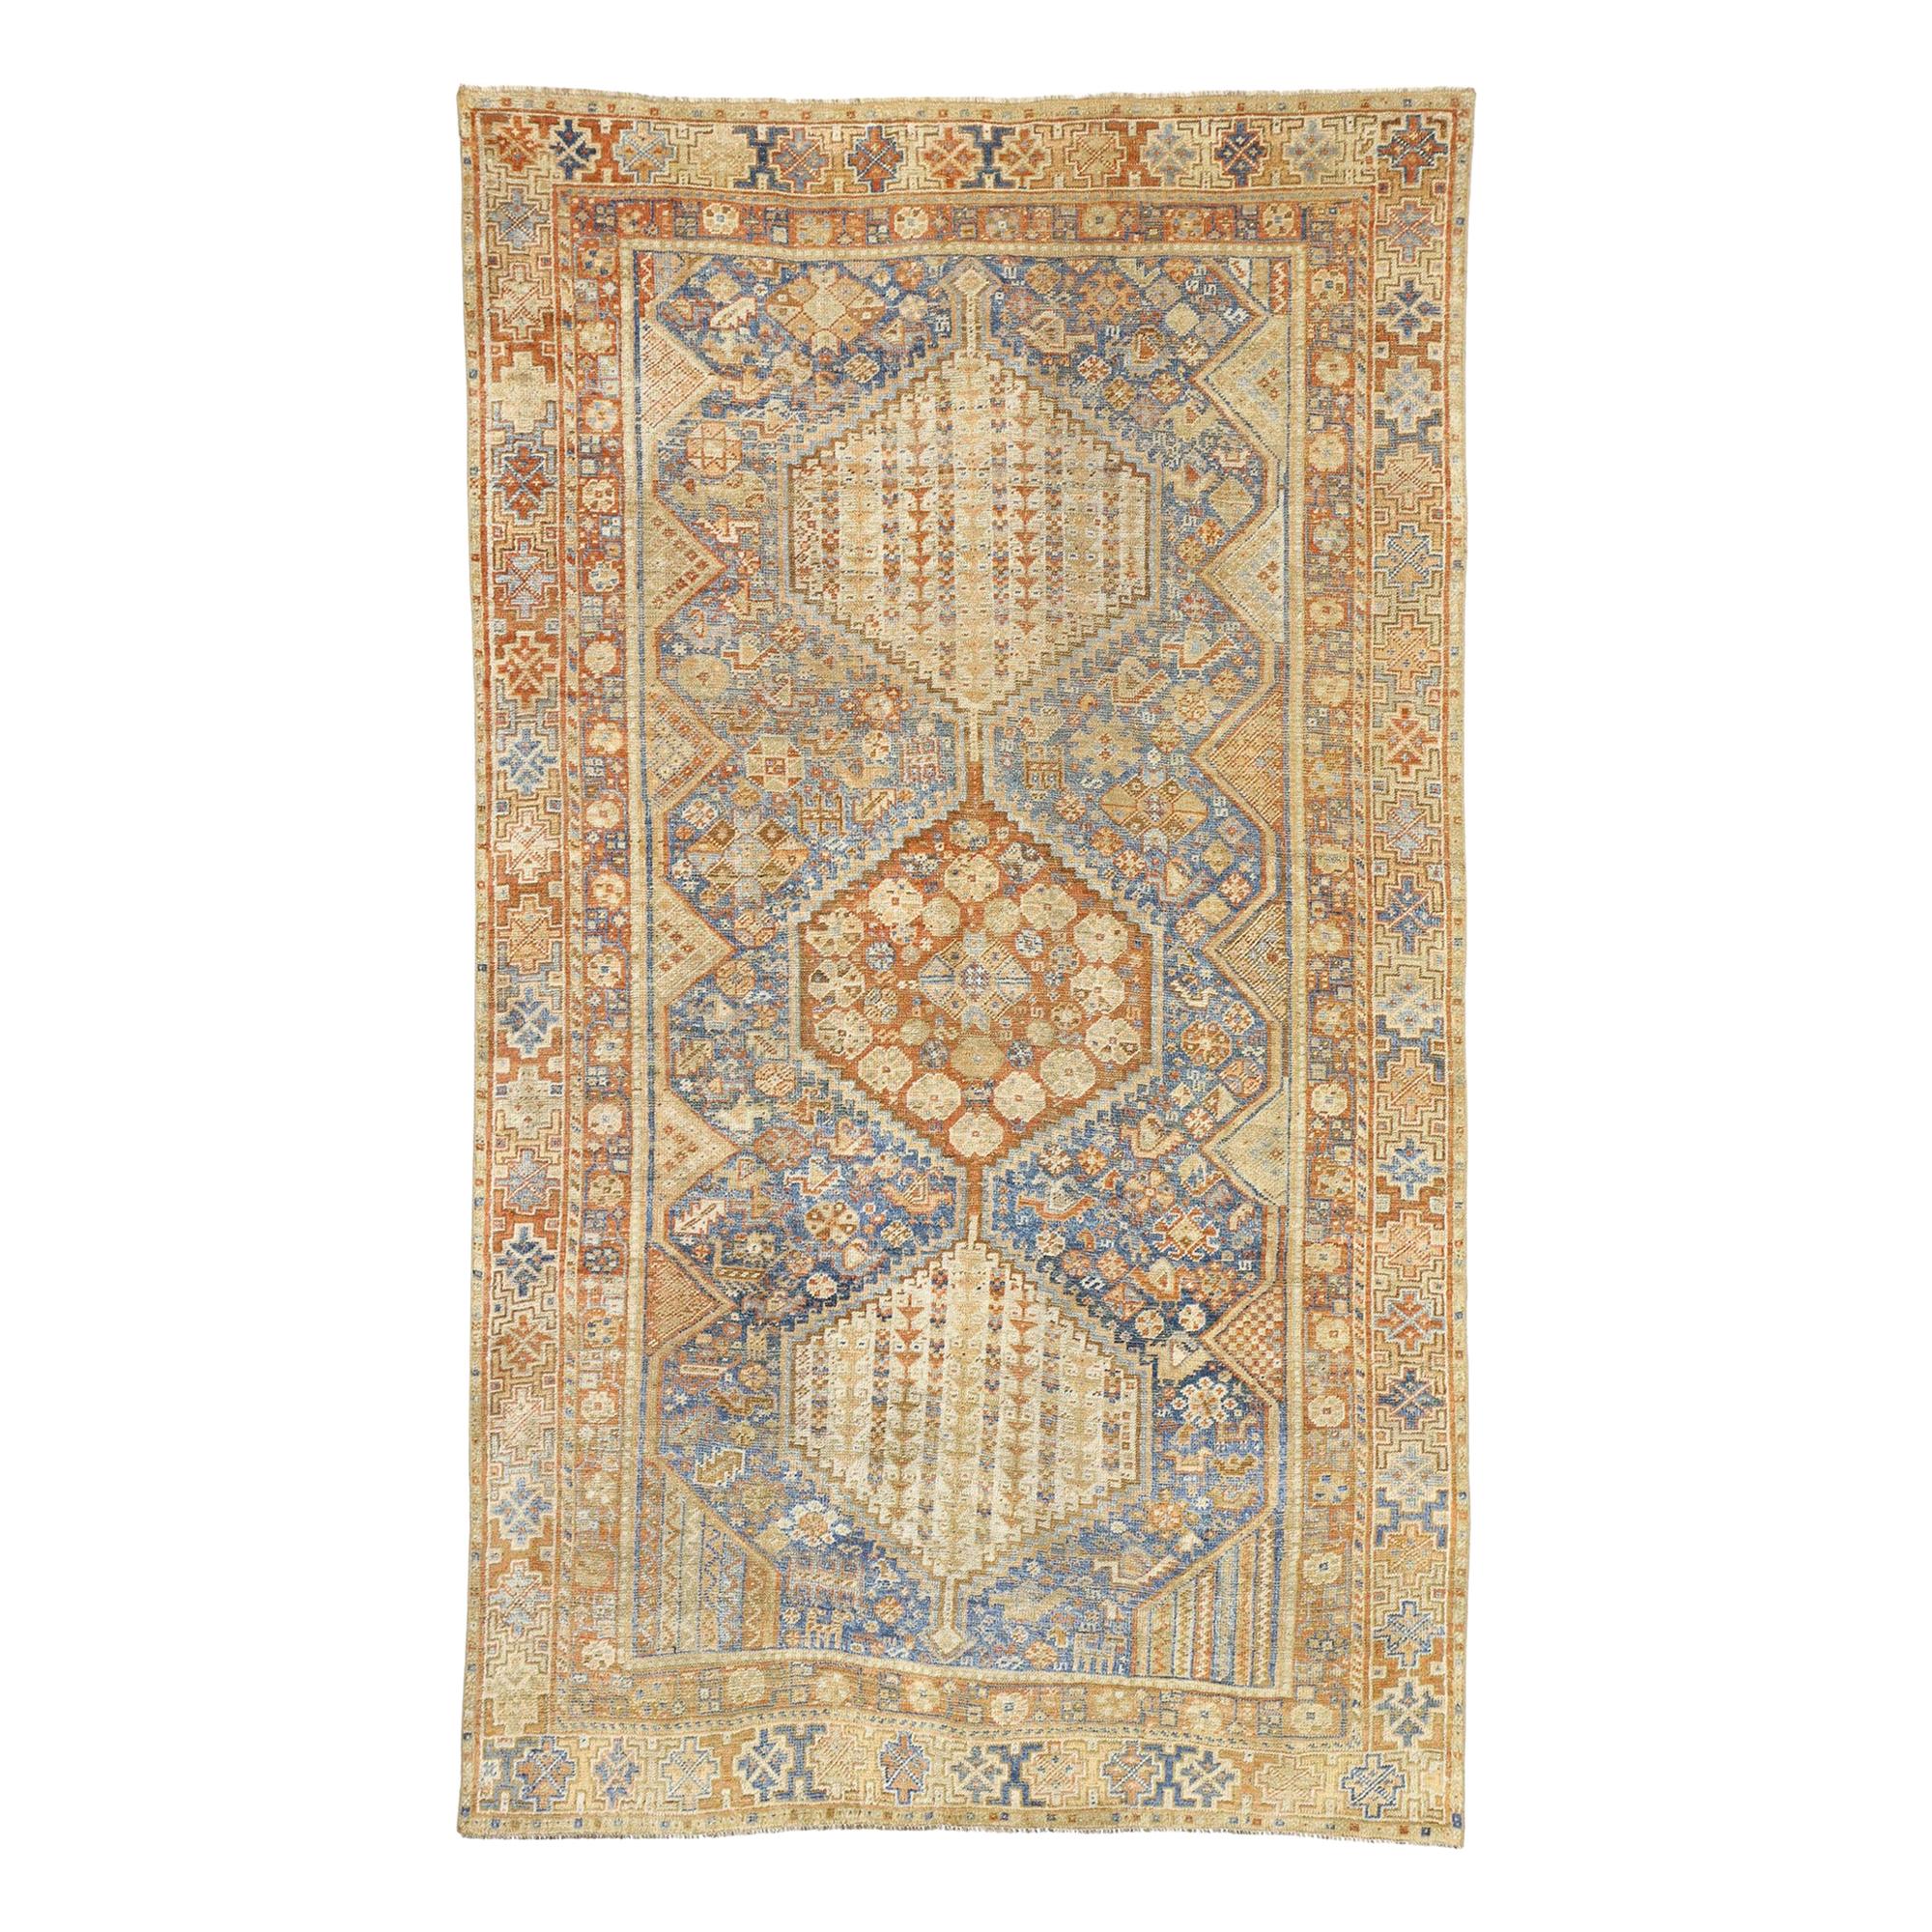 Distressed Antique Persian Shiraz Design Rug with Italian Cottage Rustic Style